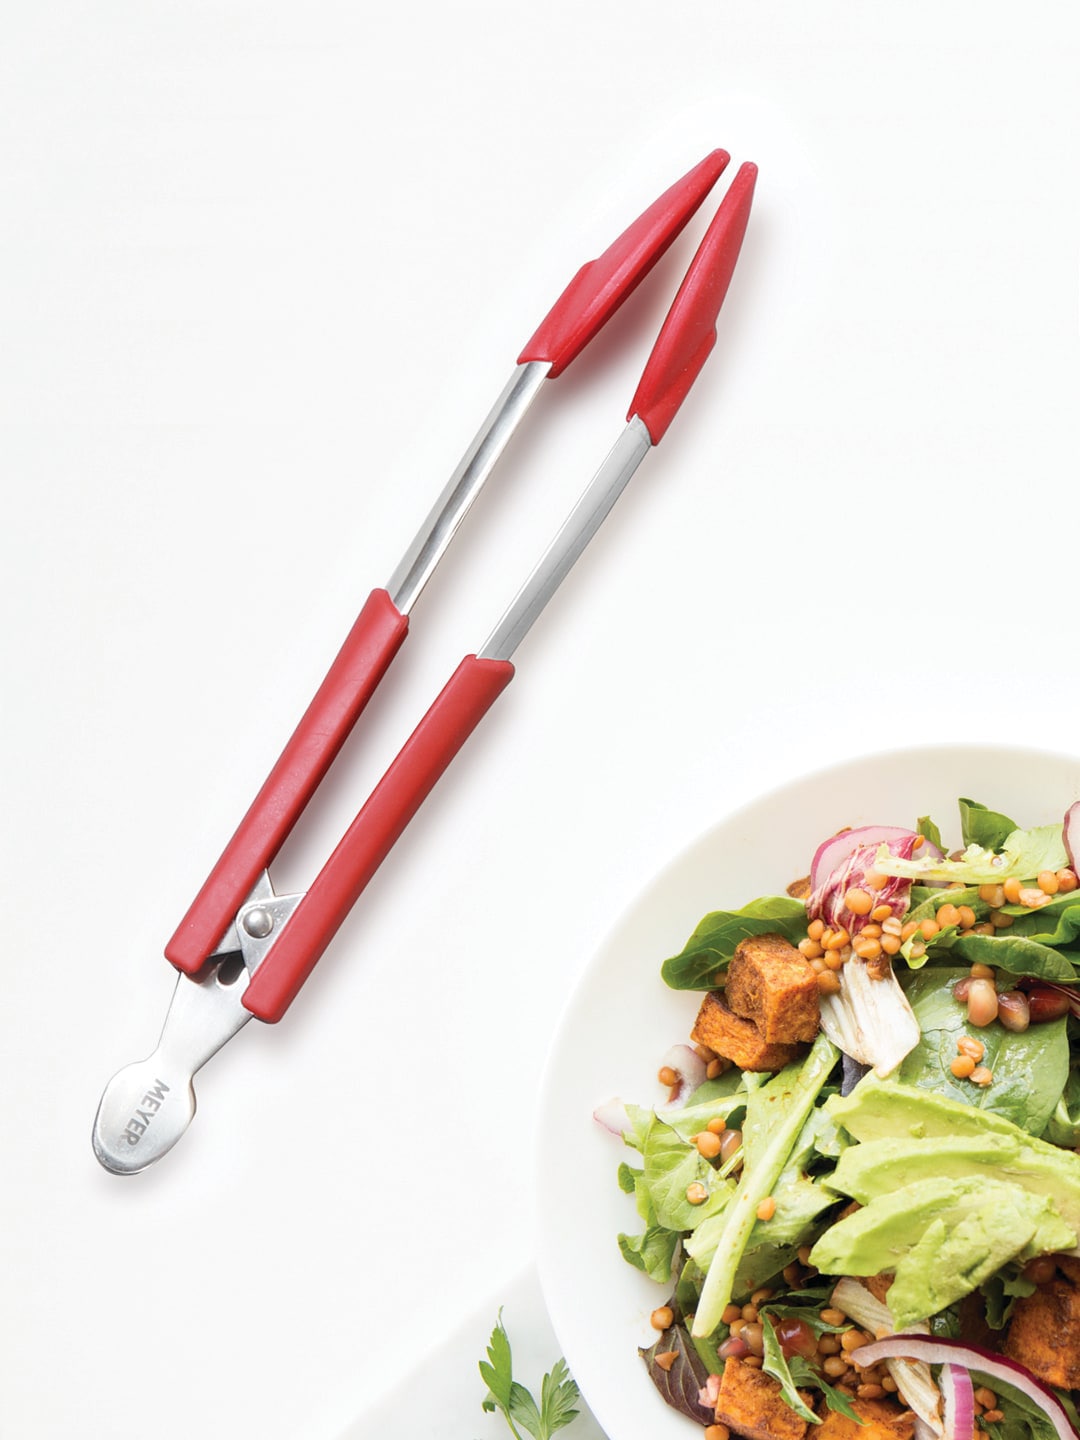 MEYER Red & Silver-Toned Silicone Tongs With Stainless Steel Body, 30 cm Price in India